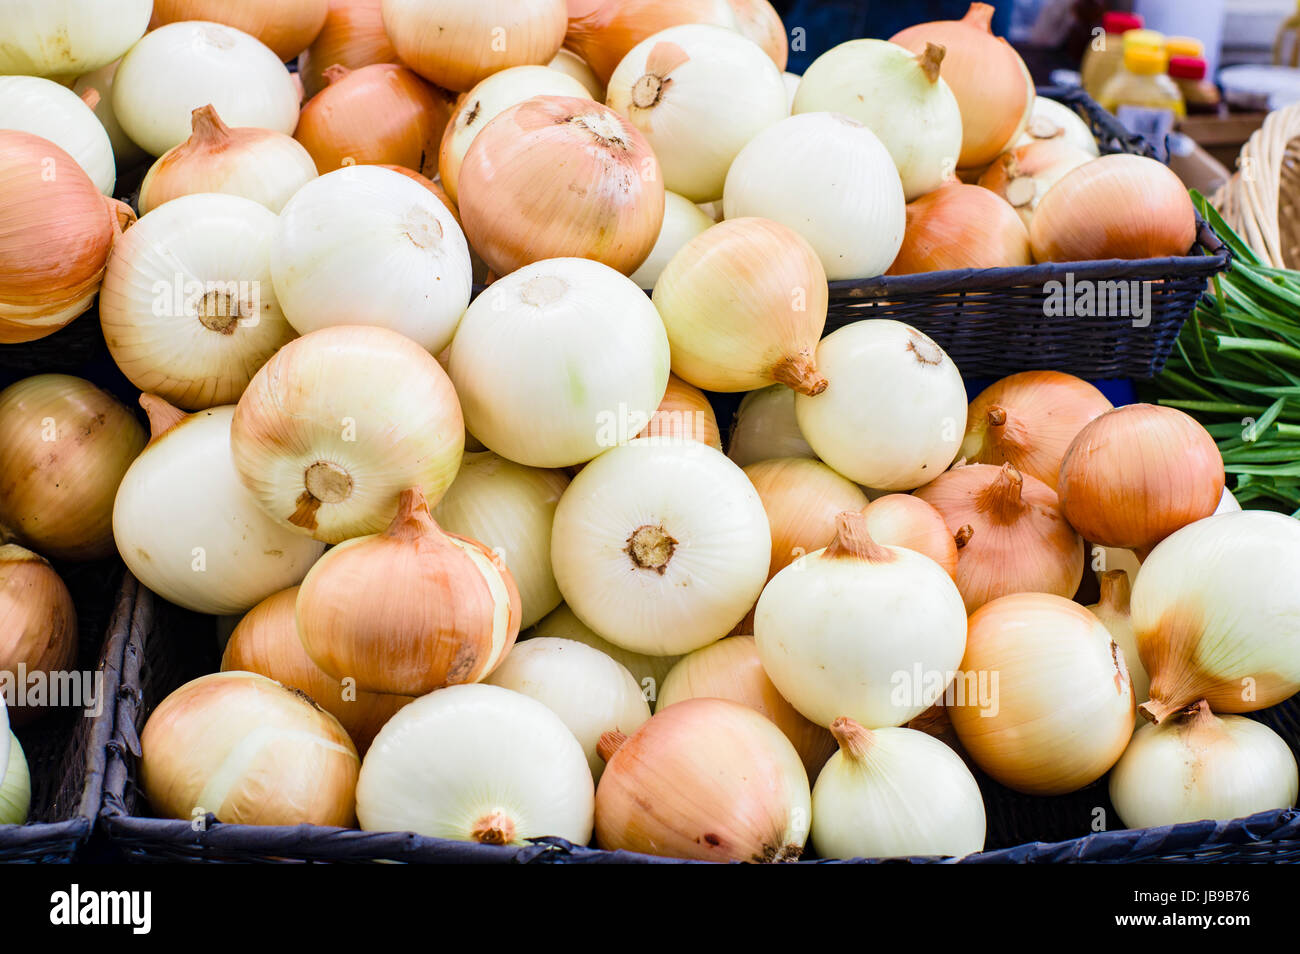 Fresh onions on display at the farmers market Stock Photo